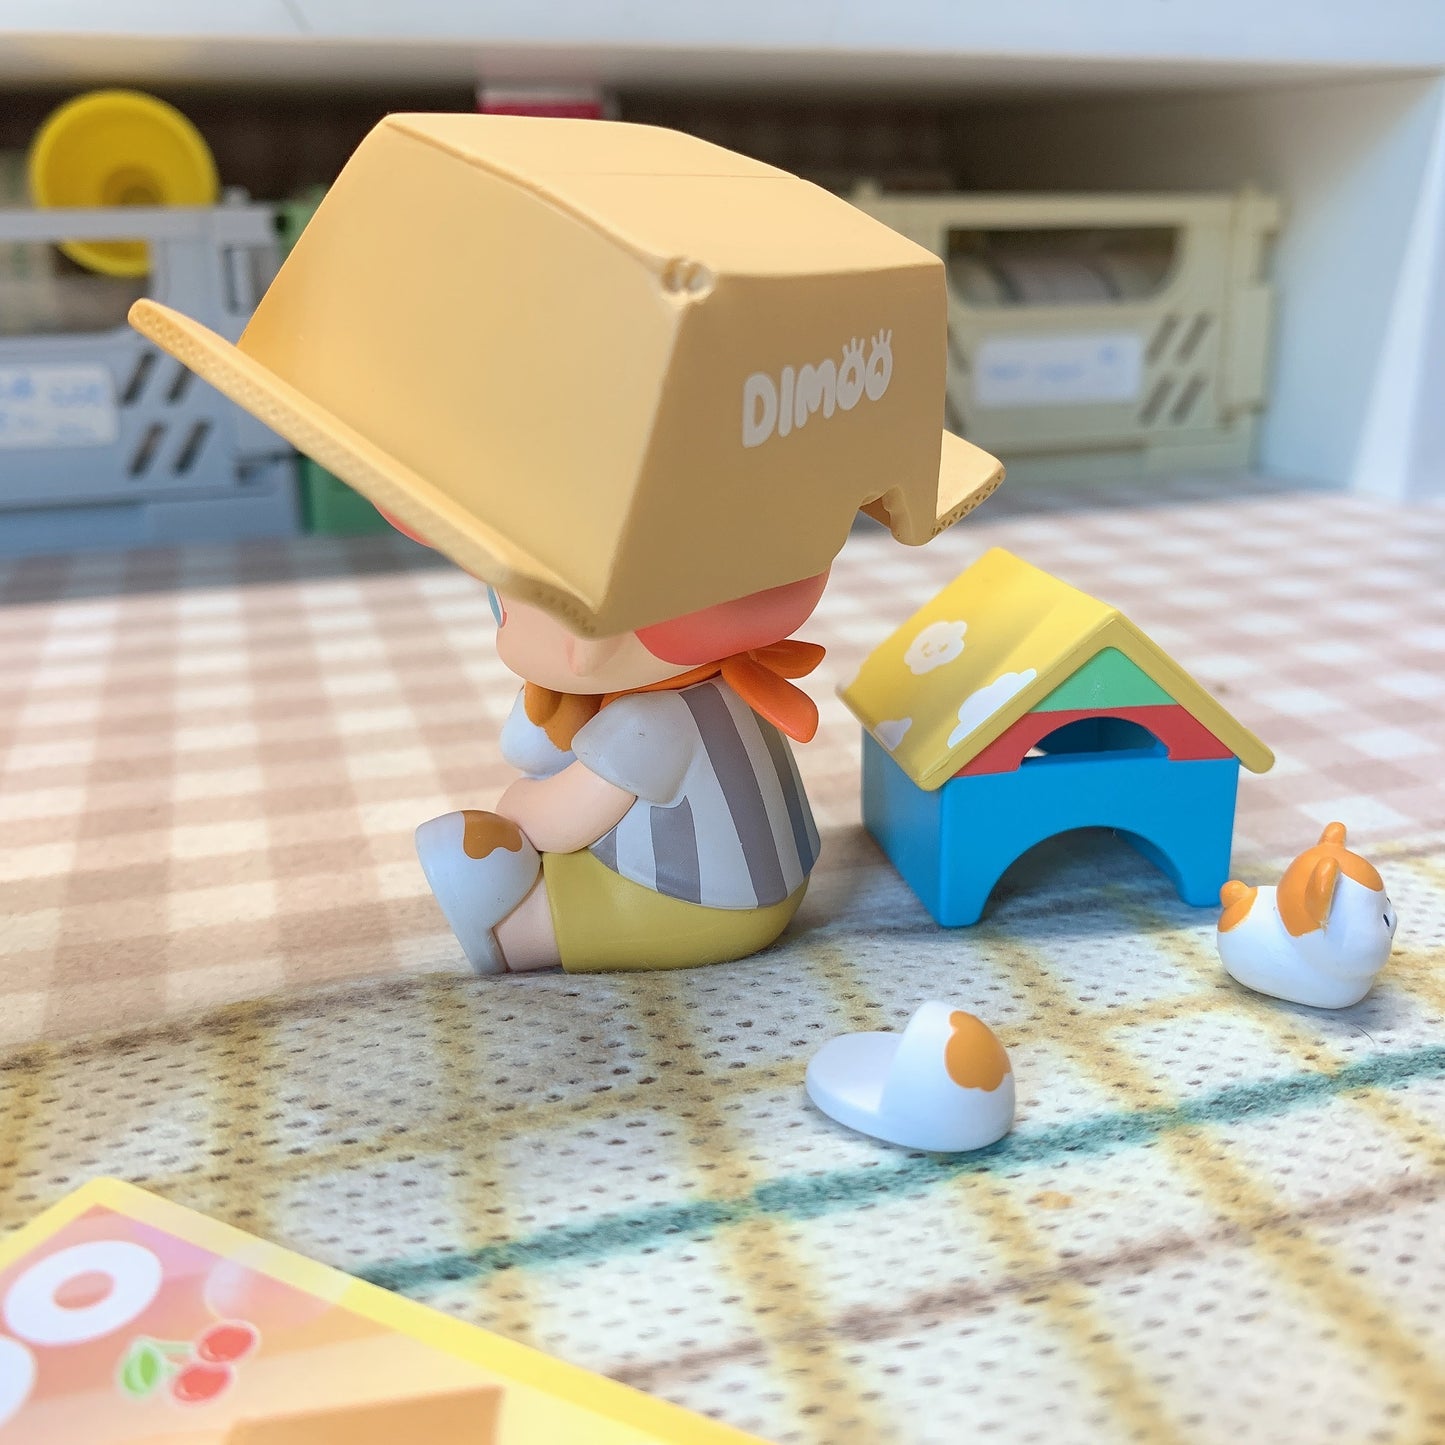 【PRELOVED and SALE 】POPMART Dimoo blind box toy Pets Vacation Hamsters Architect